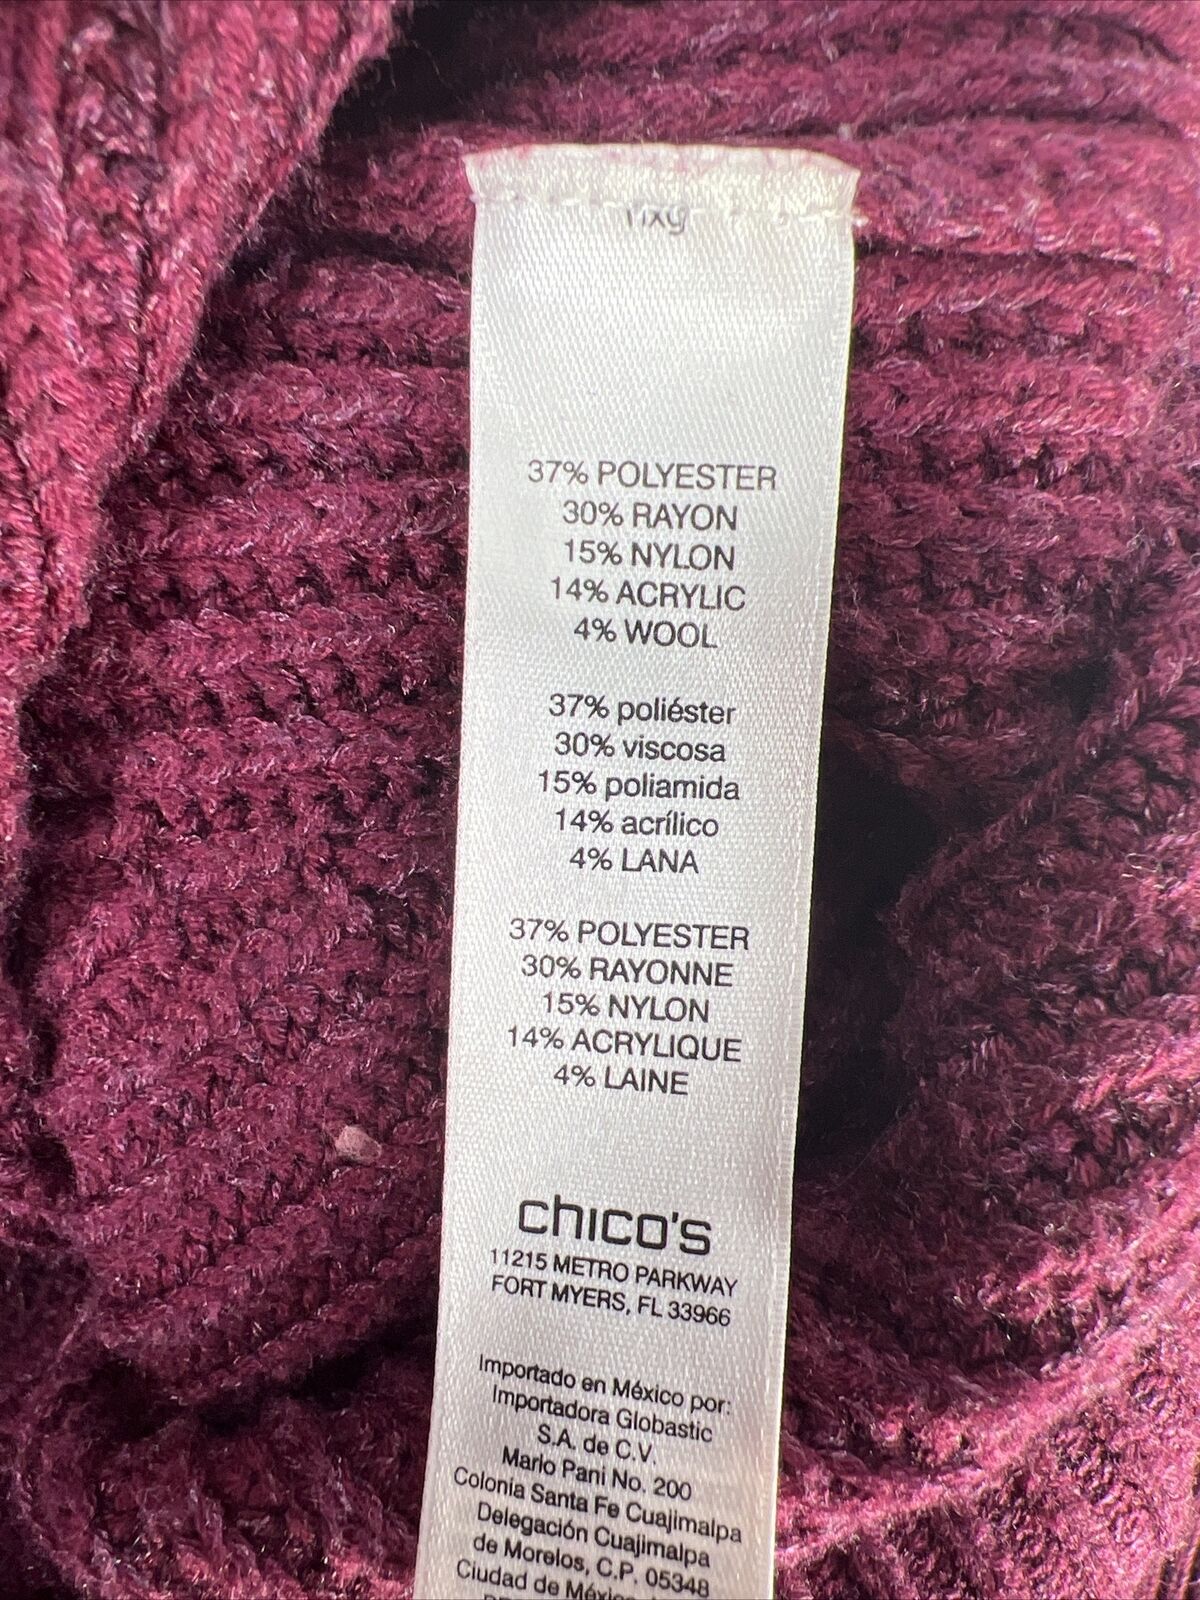 Chico's Women's Purple Ribbed Texture Knit Dawn Pullover Sweater - 1/US M